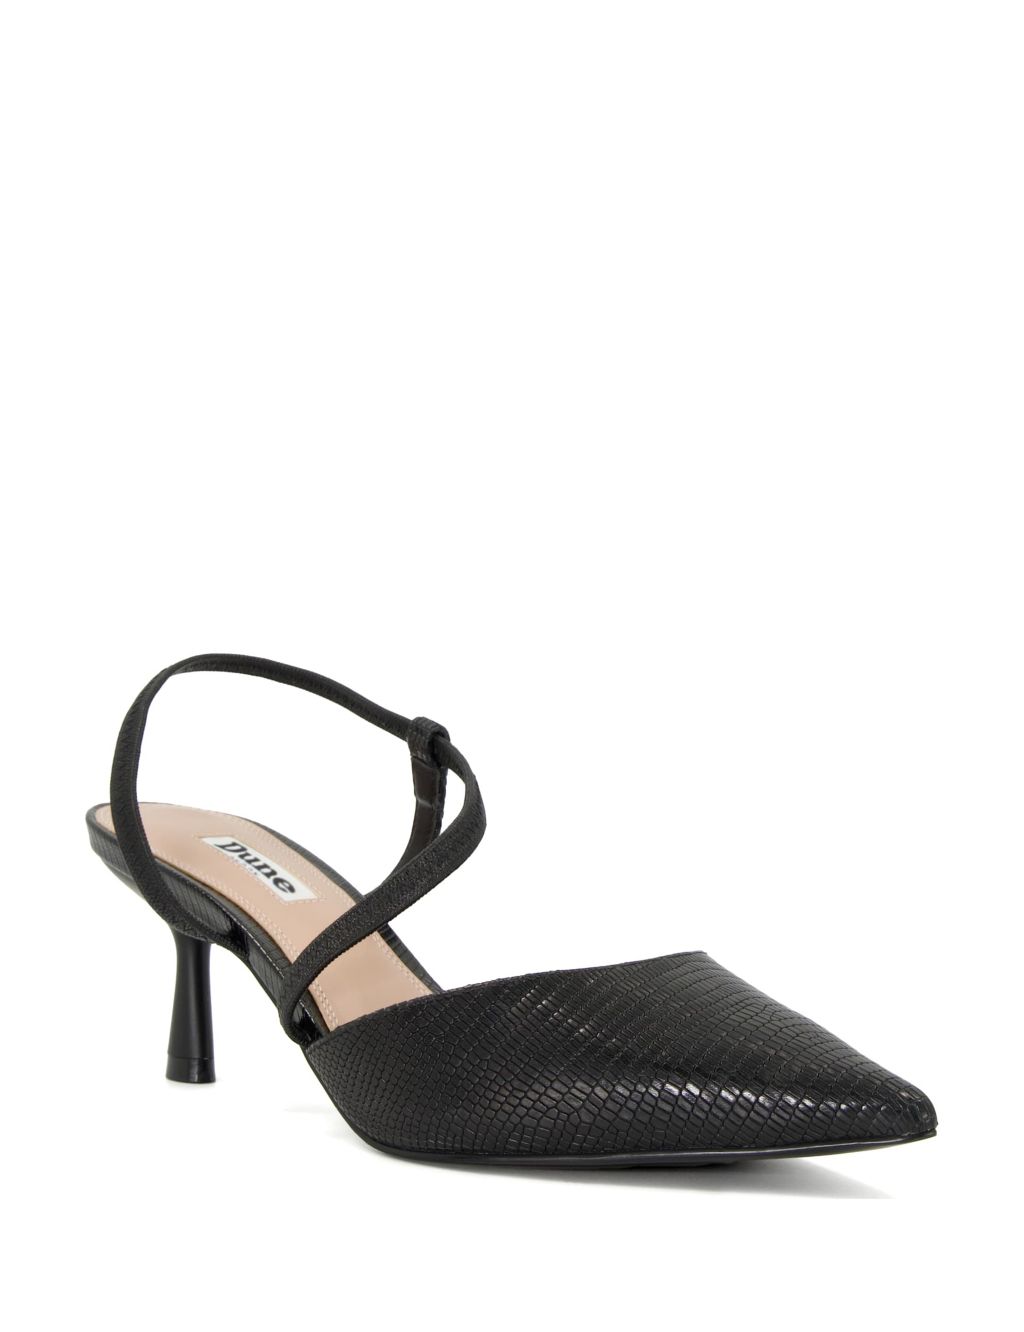 Kitten Heel Pointed Court Shoes image 2